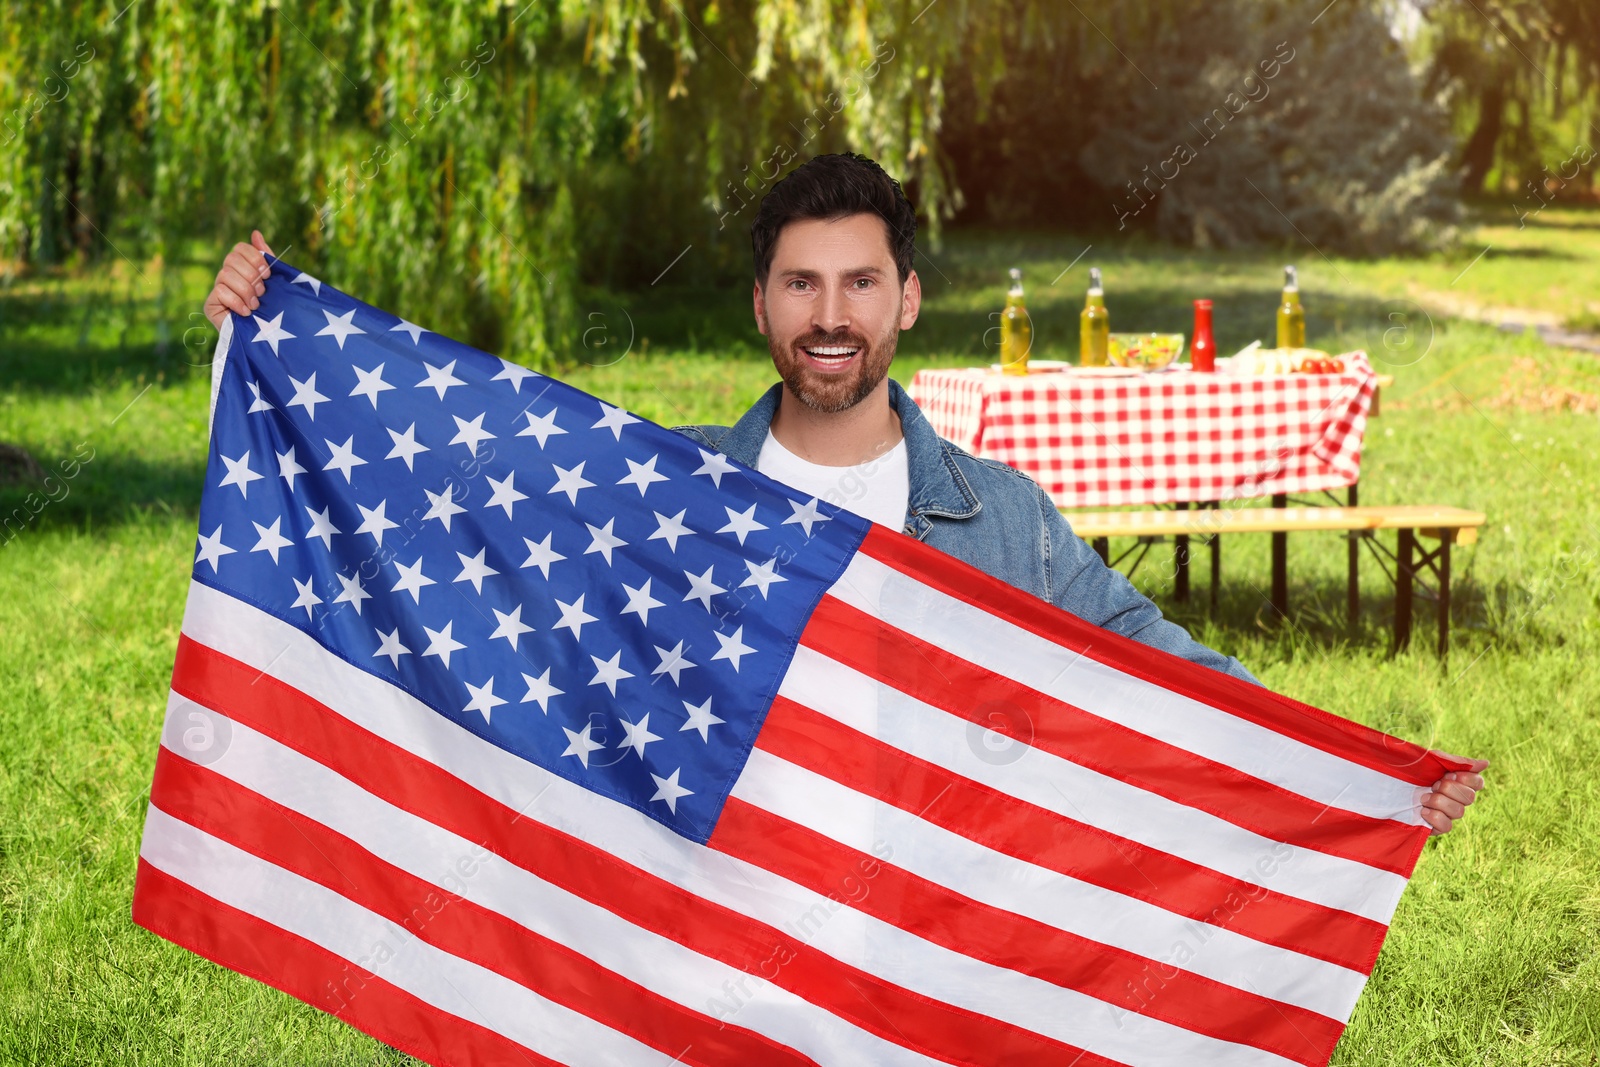 Image of 4th of July - Independence day of America. Happy man with national flag of United States having picnic in park